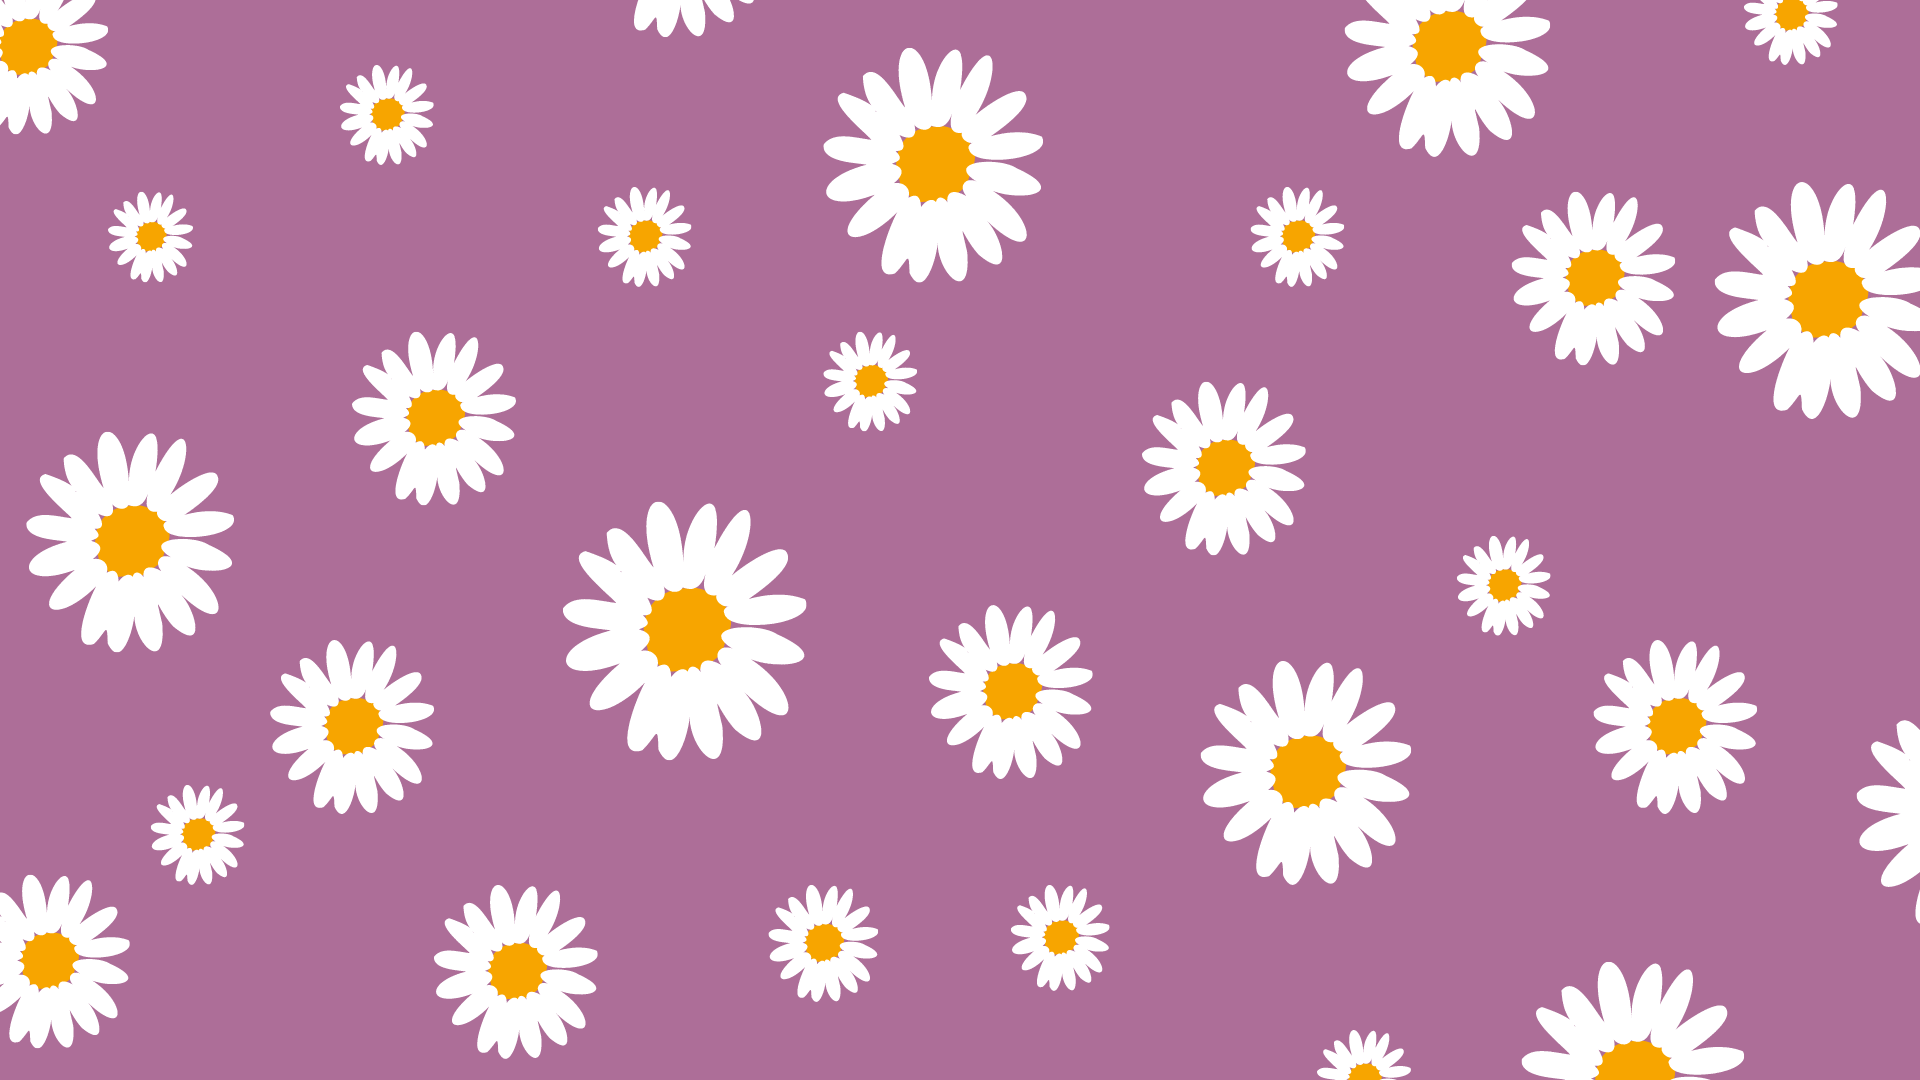 A pattern of white and yellow flowers on a purple background - Desktop, purple, cute